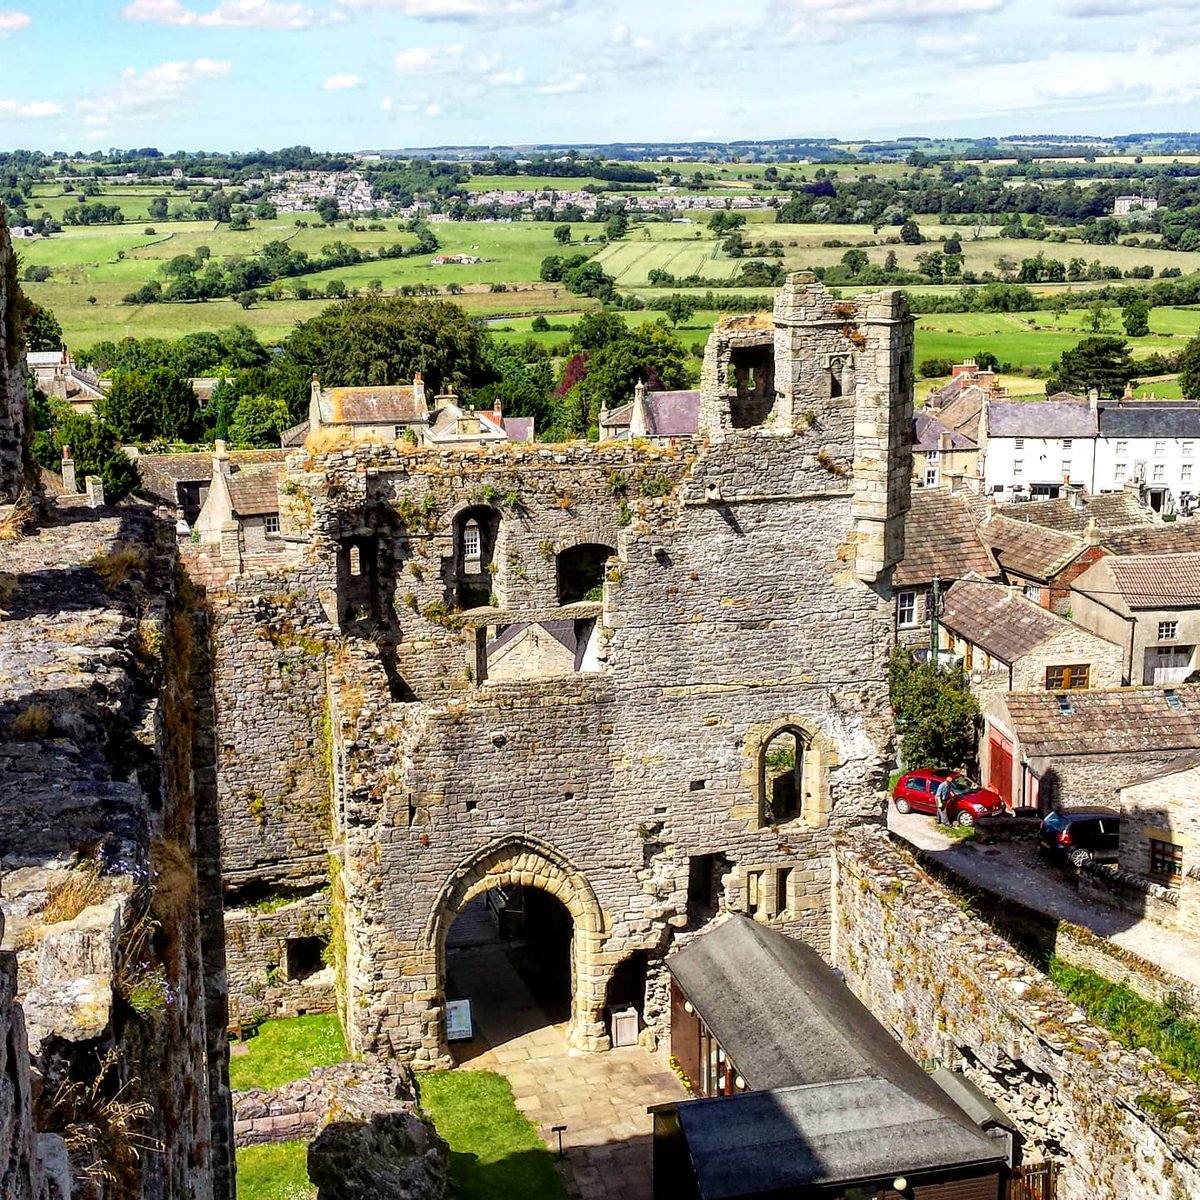 Day 13 is Middleham Castle in Yorkshire; the northern stronghold of the Nevilles  https://www.pen-and-sword.co.uk/The-Castle-in-the-Wars-of-the-Roses-Hardback/p/18426  #WOTRS_castles  @penswordbooks  @EnglishHeritage 1/12